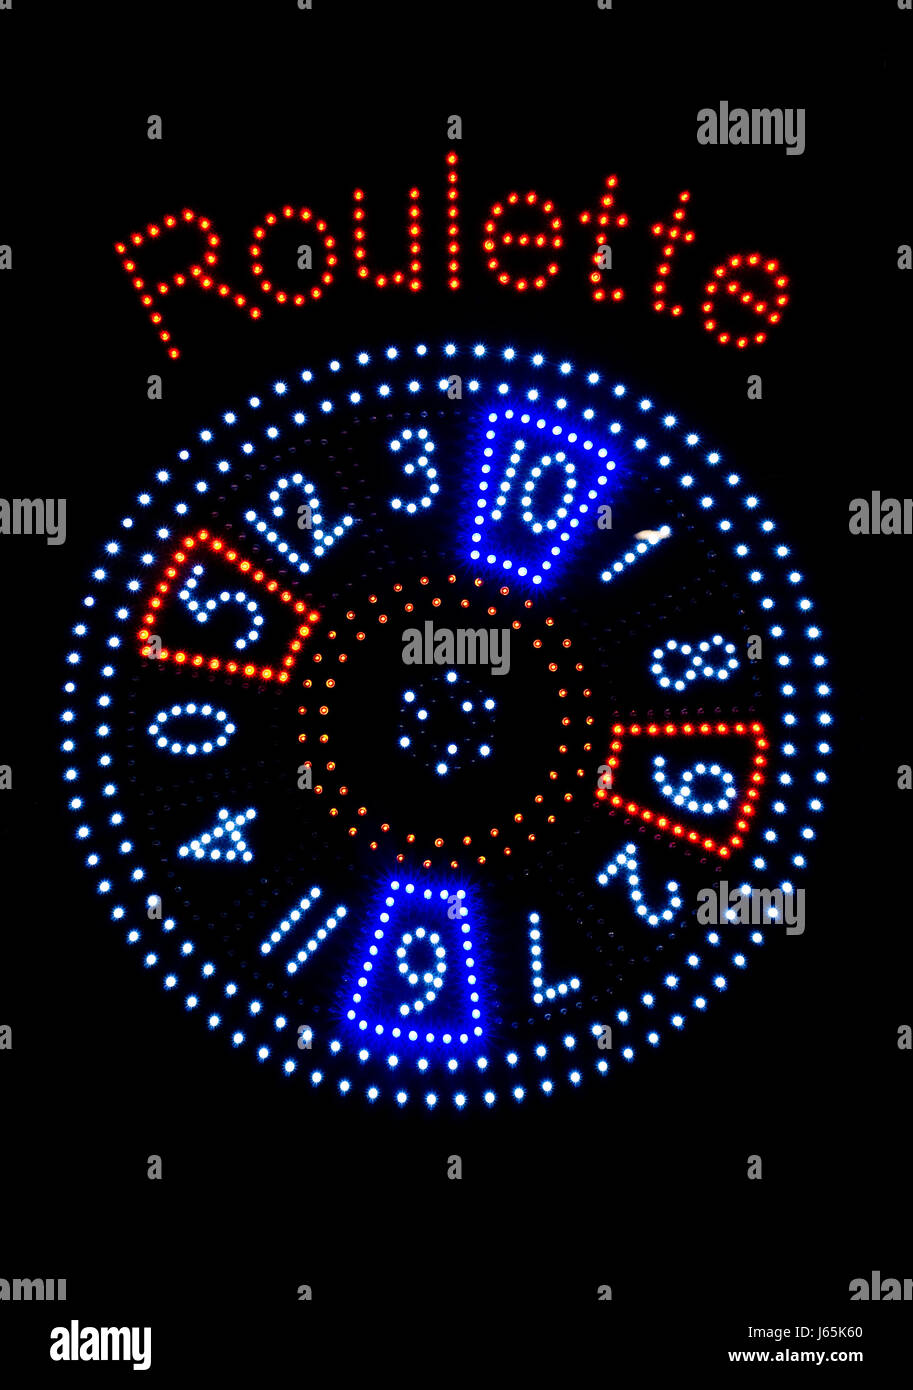 risk casino game of chance gambling roulettes amusement arcade pay lose losing Stock Photo